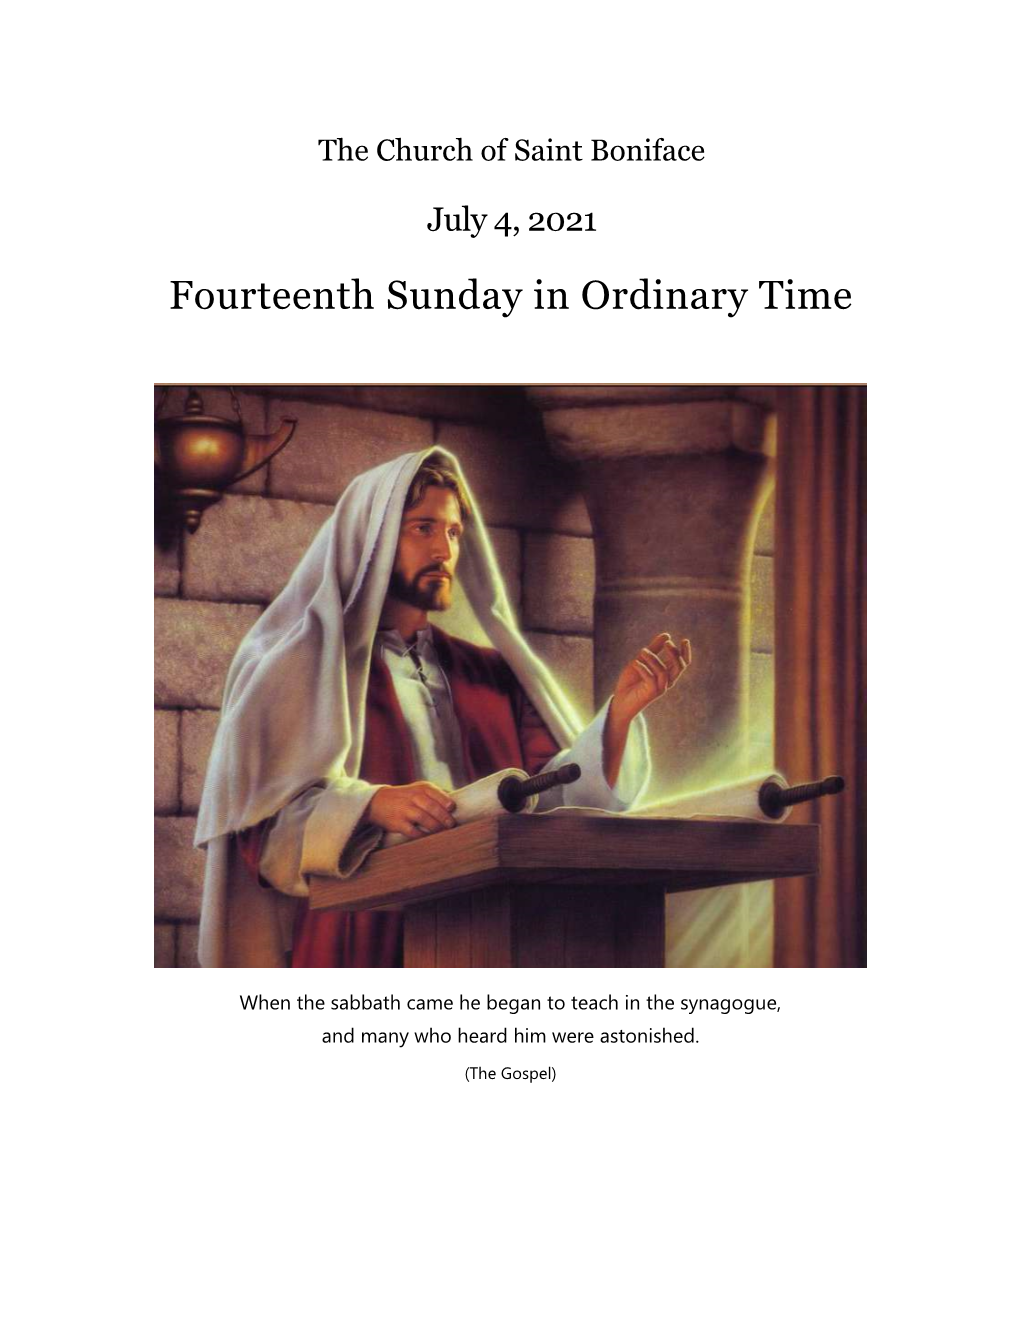 Fourteenth Sunday in Ordinary Time